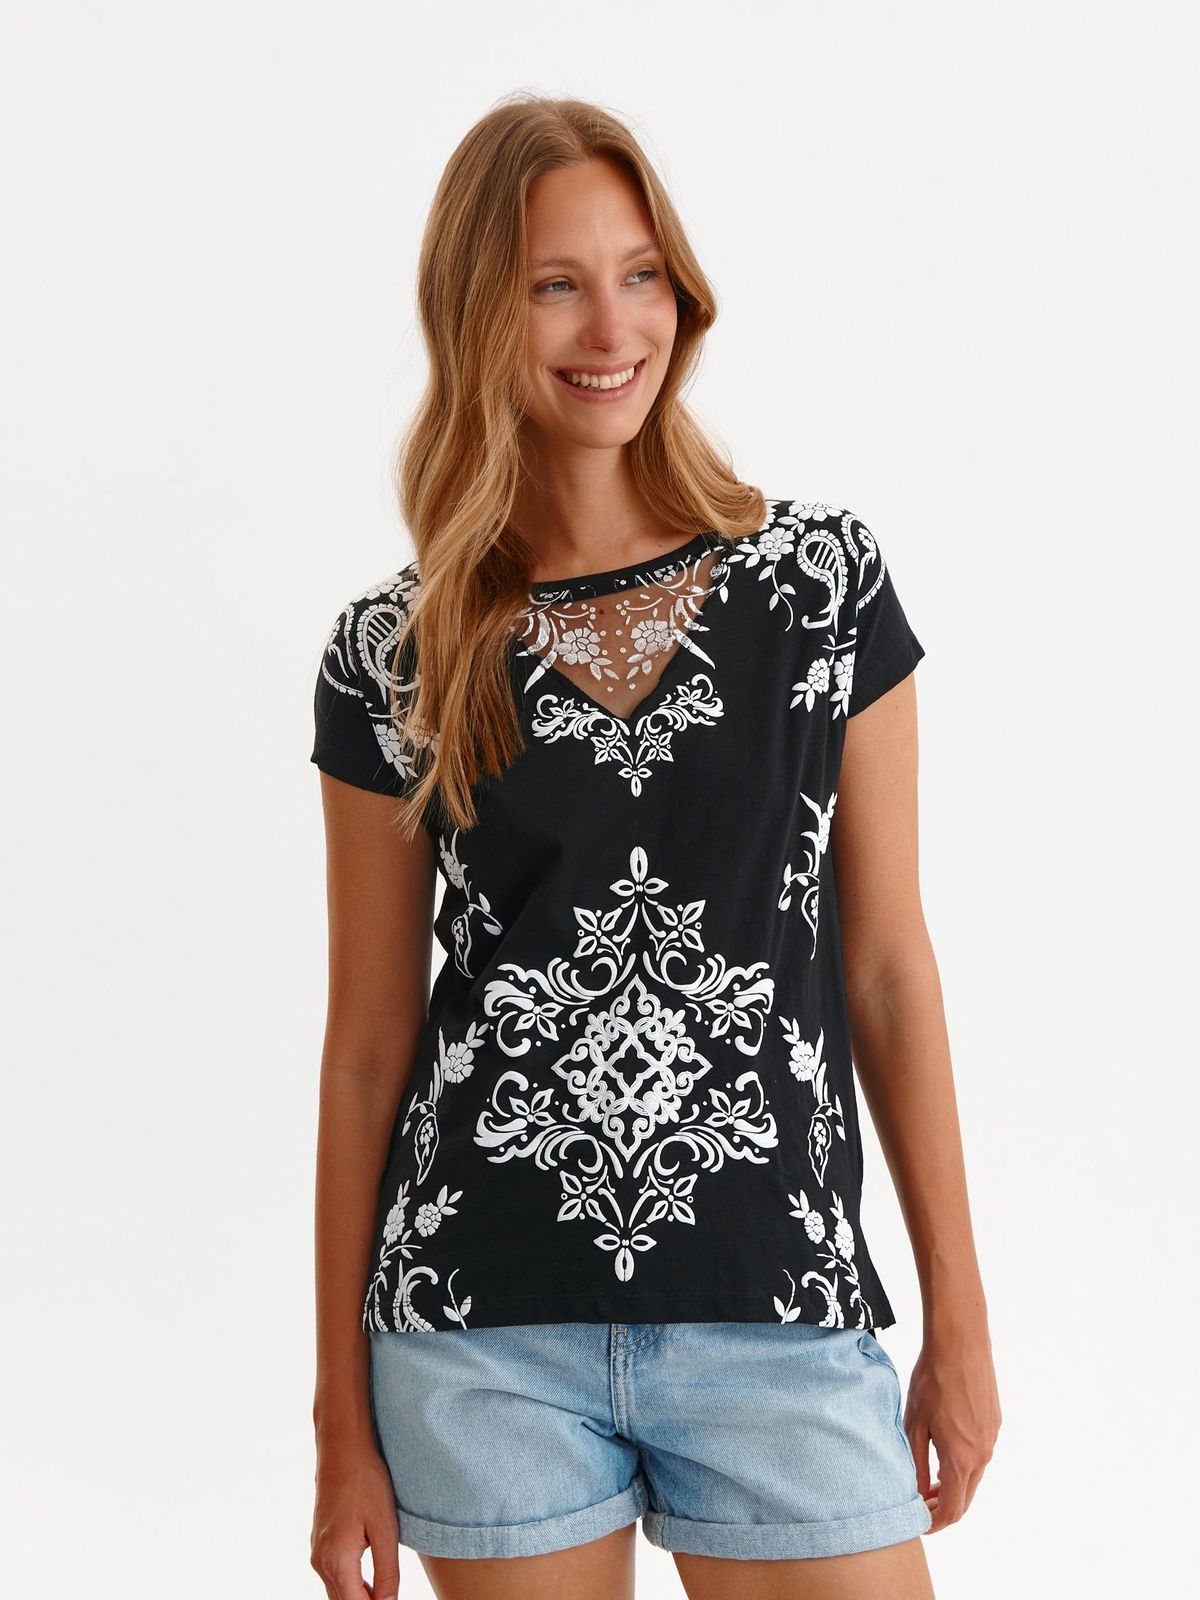 Black t-shirt cotton abstract